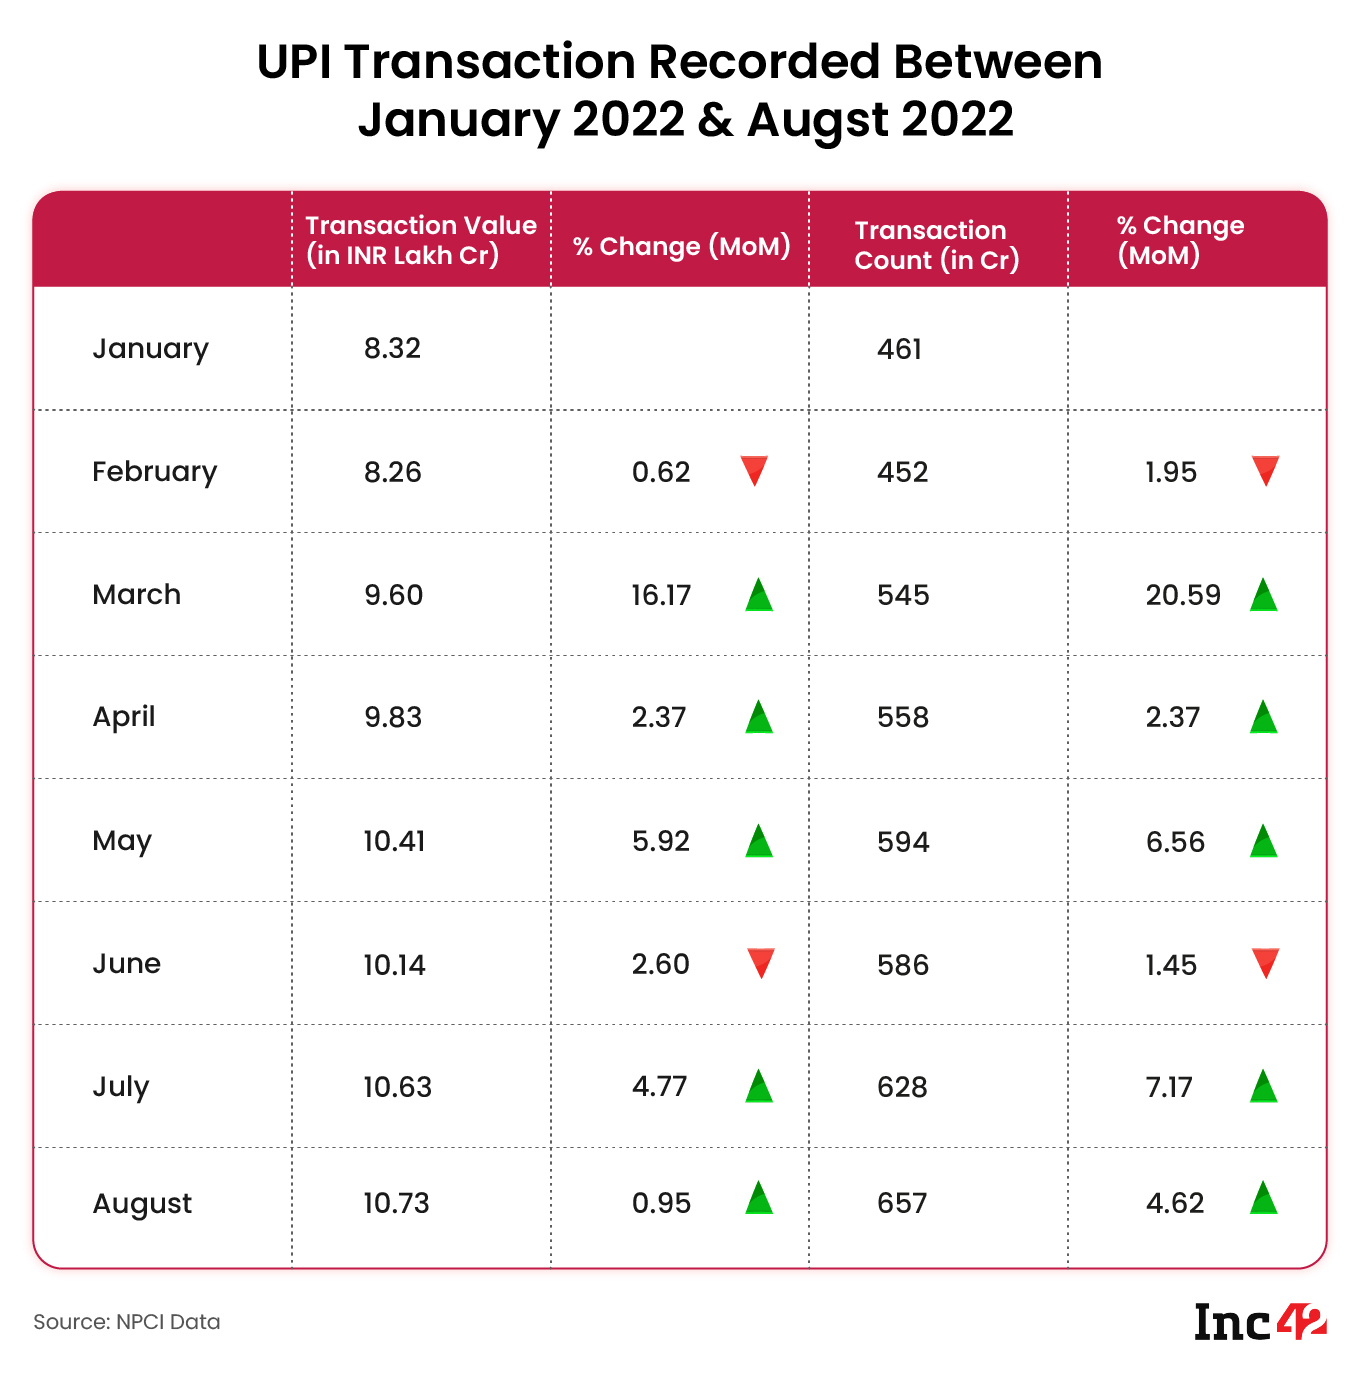 UPI recorded 657 Cr transactions in August 2022